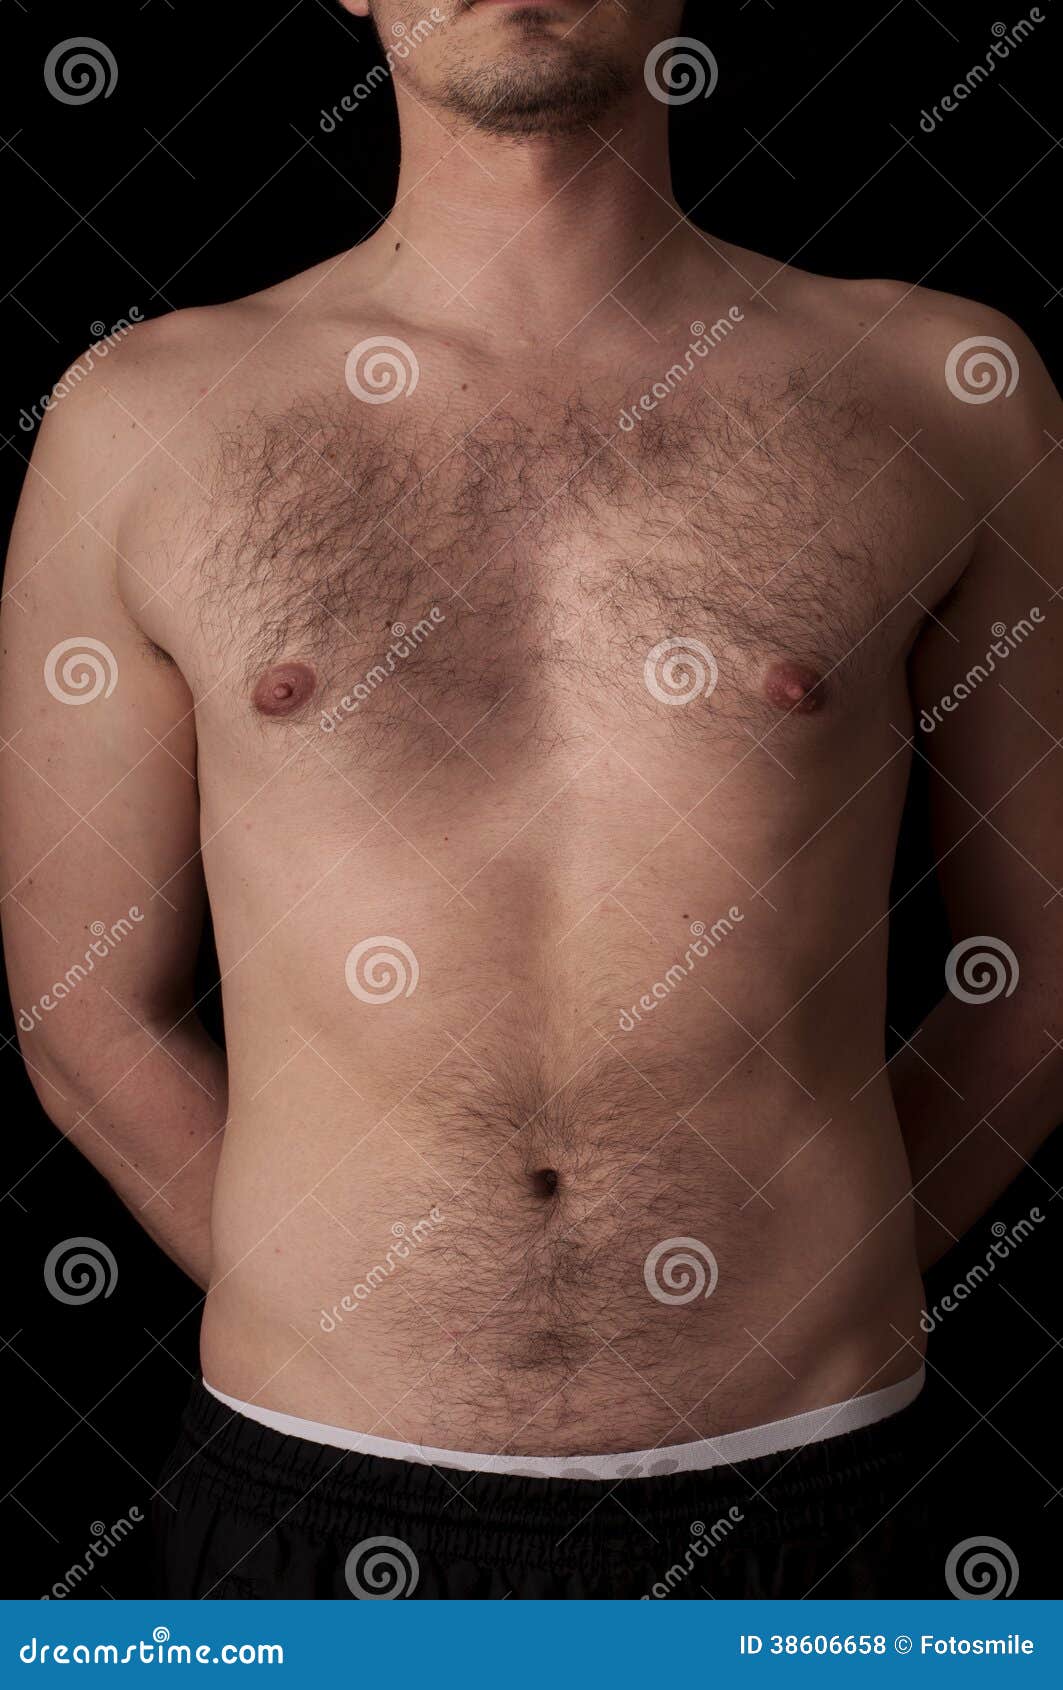 Chest stock photo. Image of part, palpatory, male, torso ...